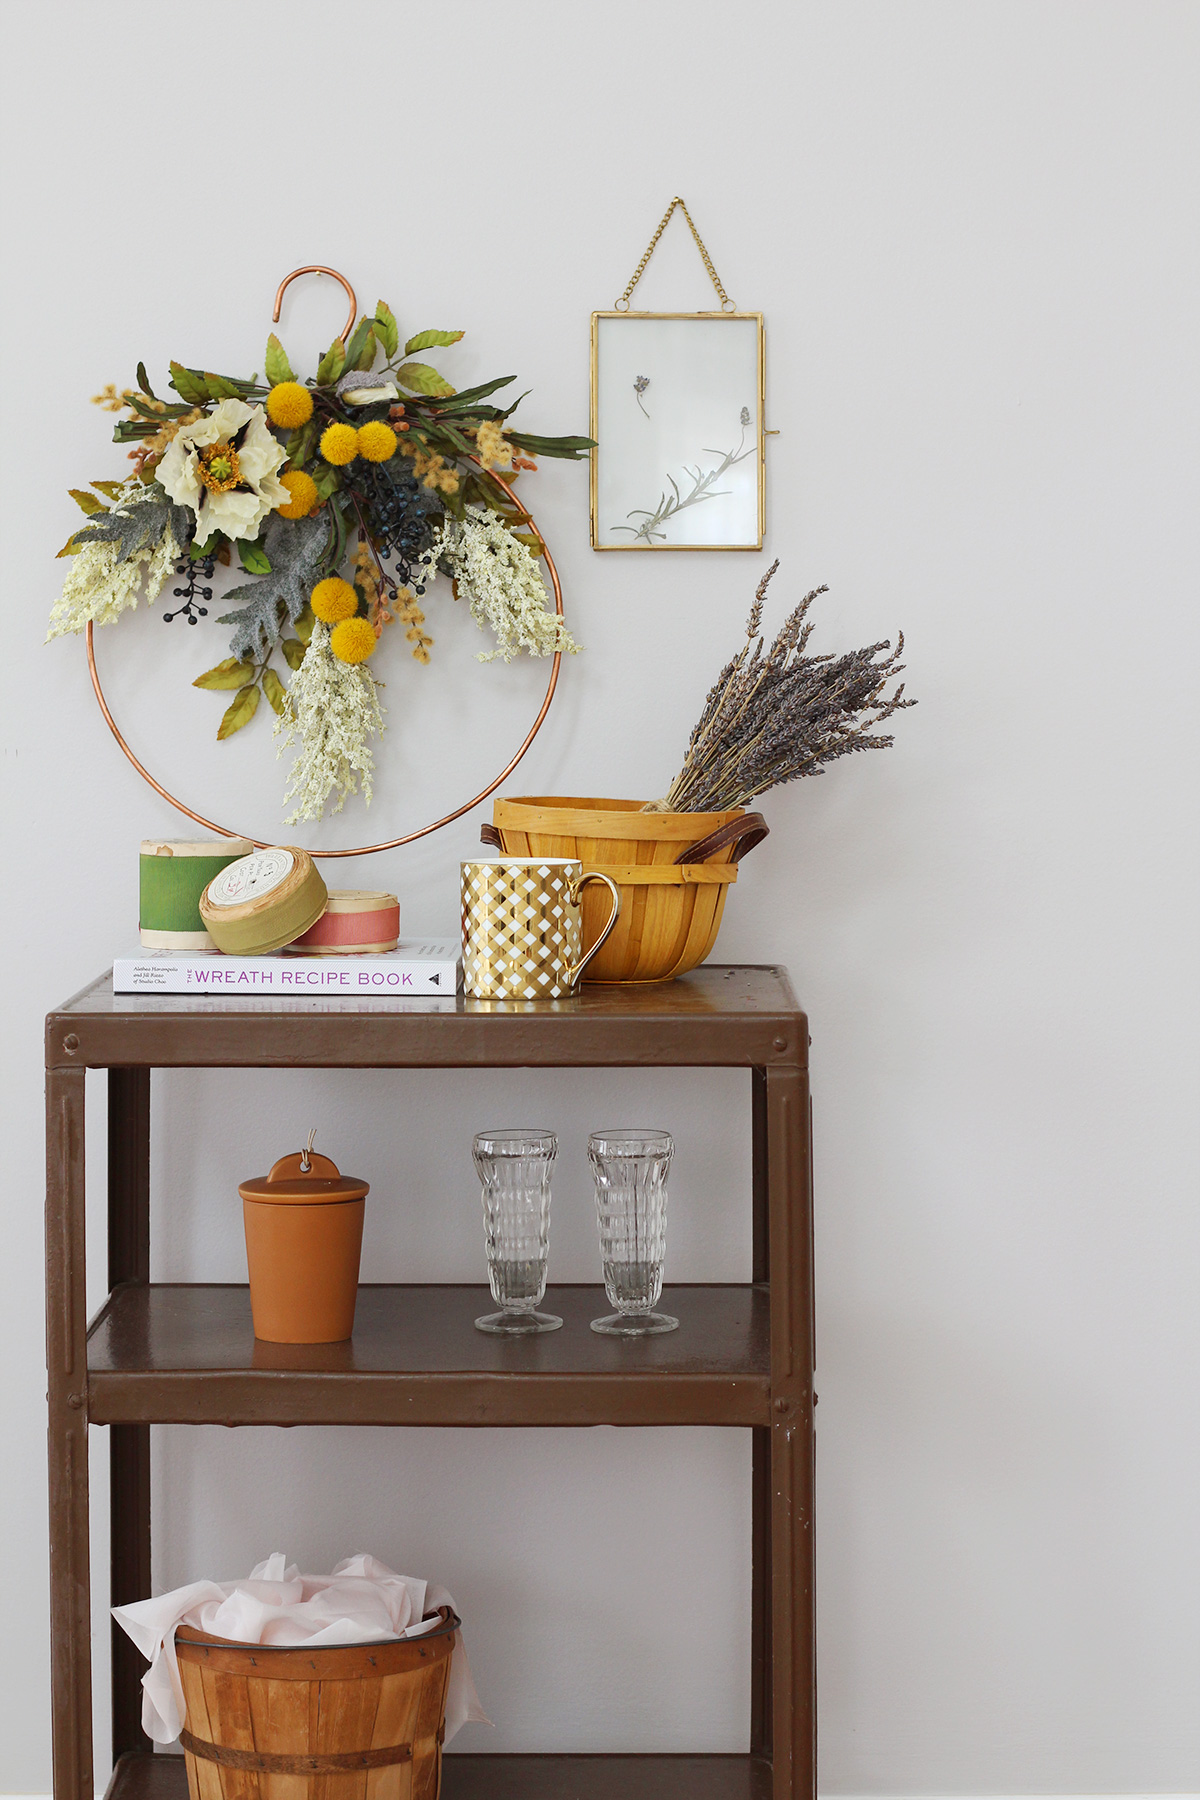 4 Tips for Displaying a Wreath Indoors